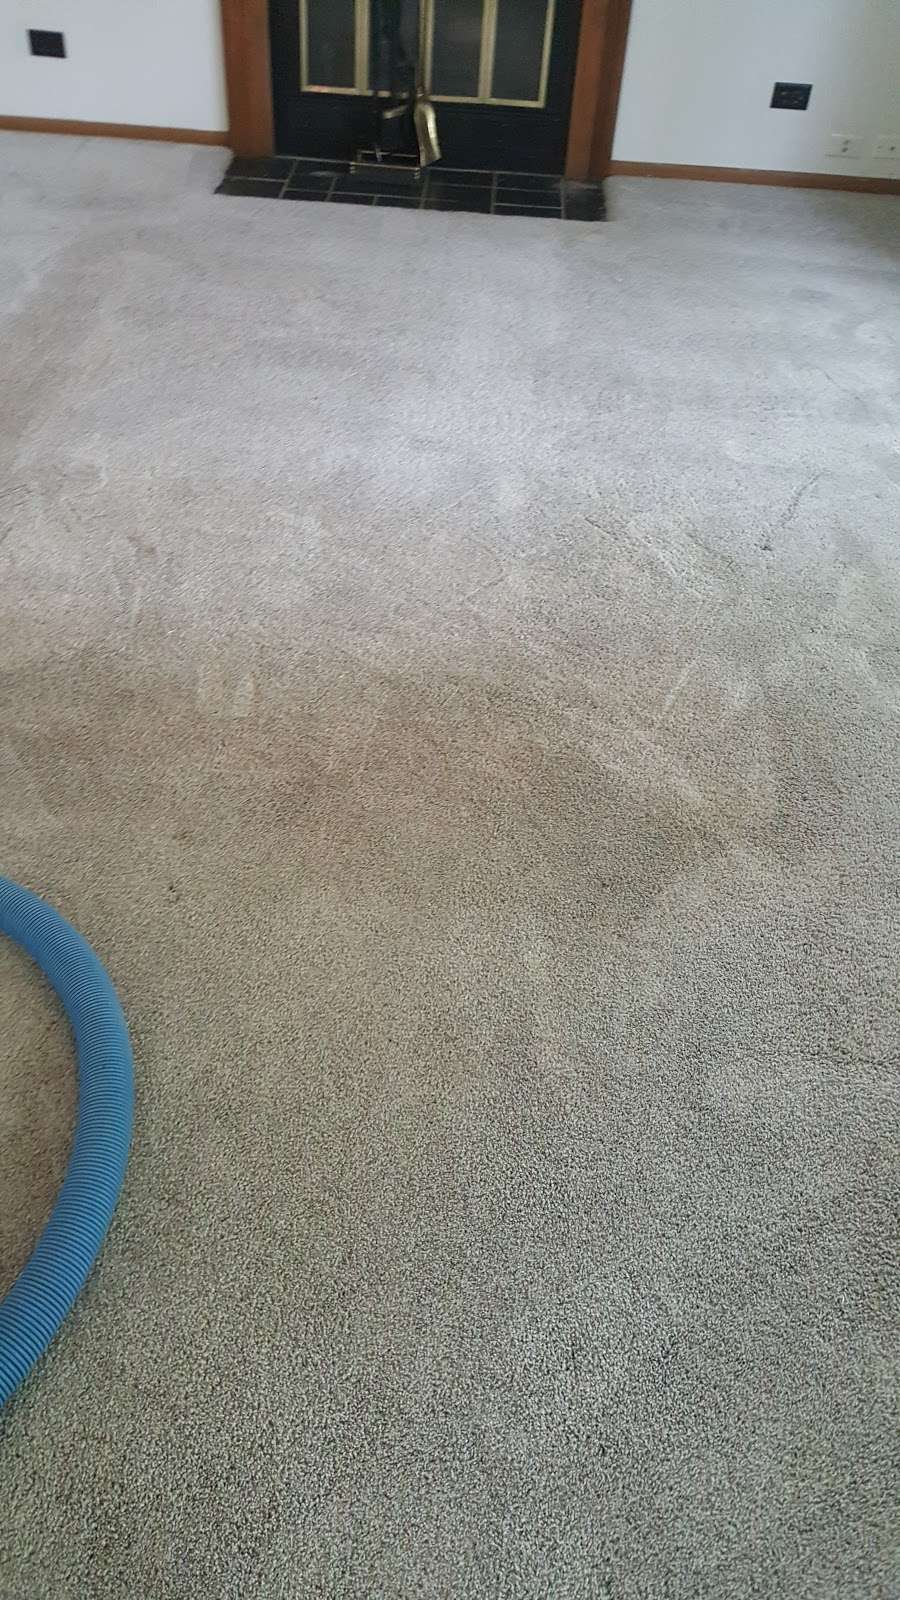 Beyond Carpet Cleaning | 1239 Ronzheimer Ave, St. Charles, IL 60174 | Phone: (630) 779-4295